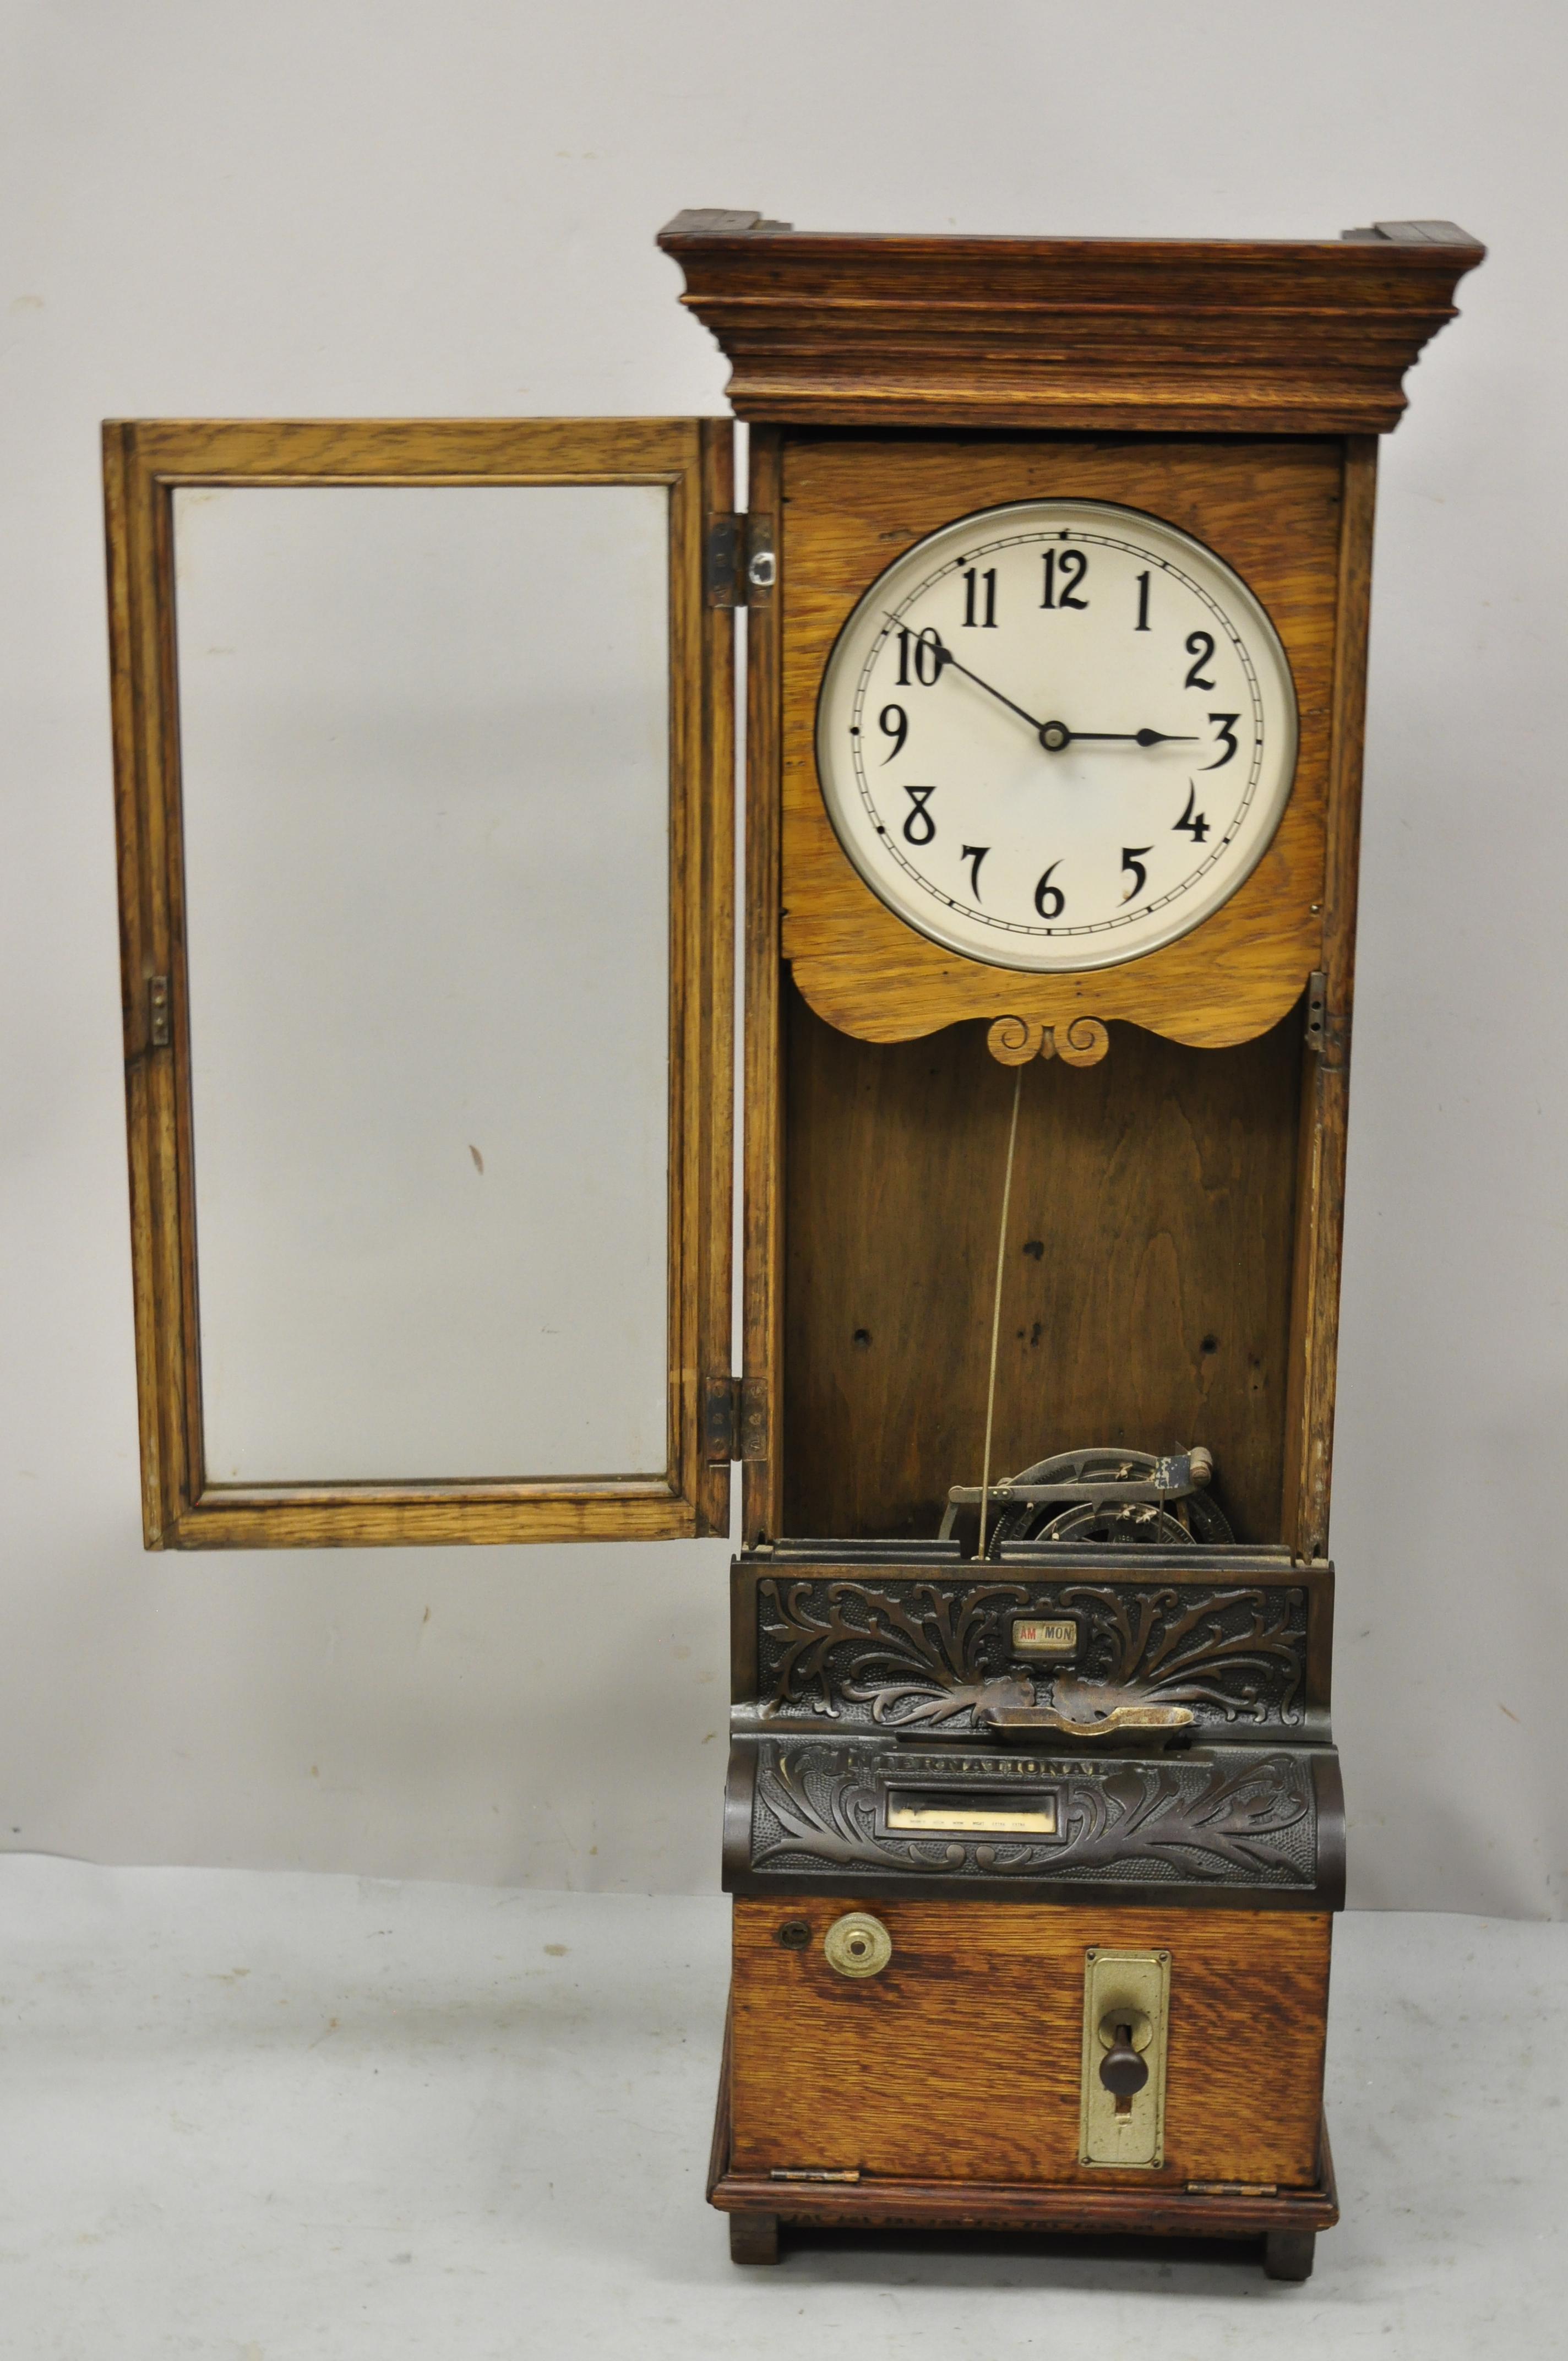 North American Antique International Time Recording Co. Golden Oak Wood Wall Mount Time Clock